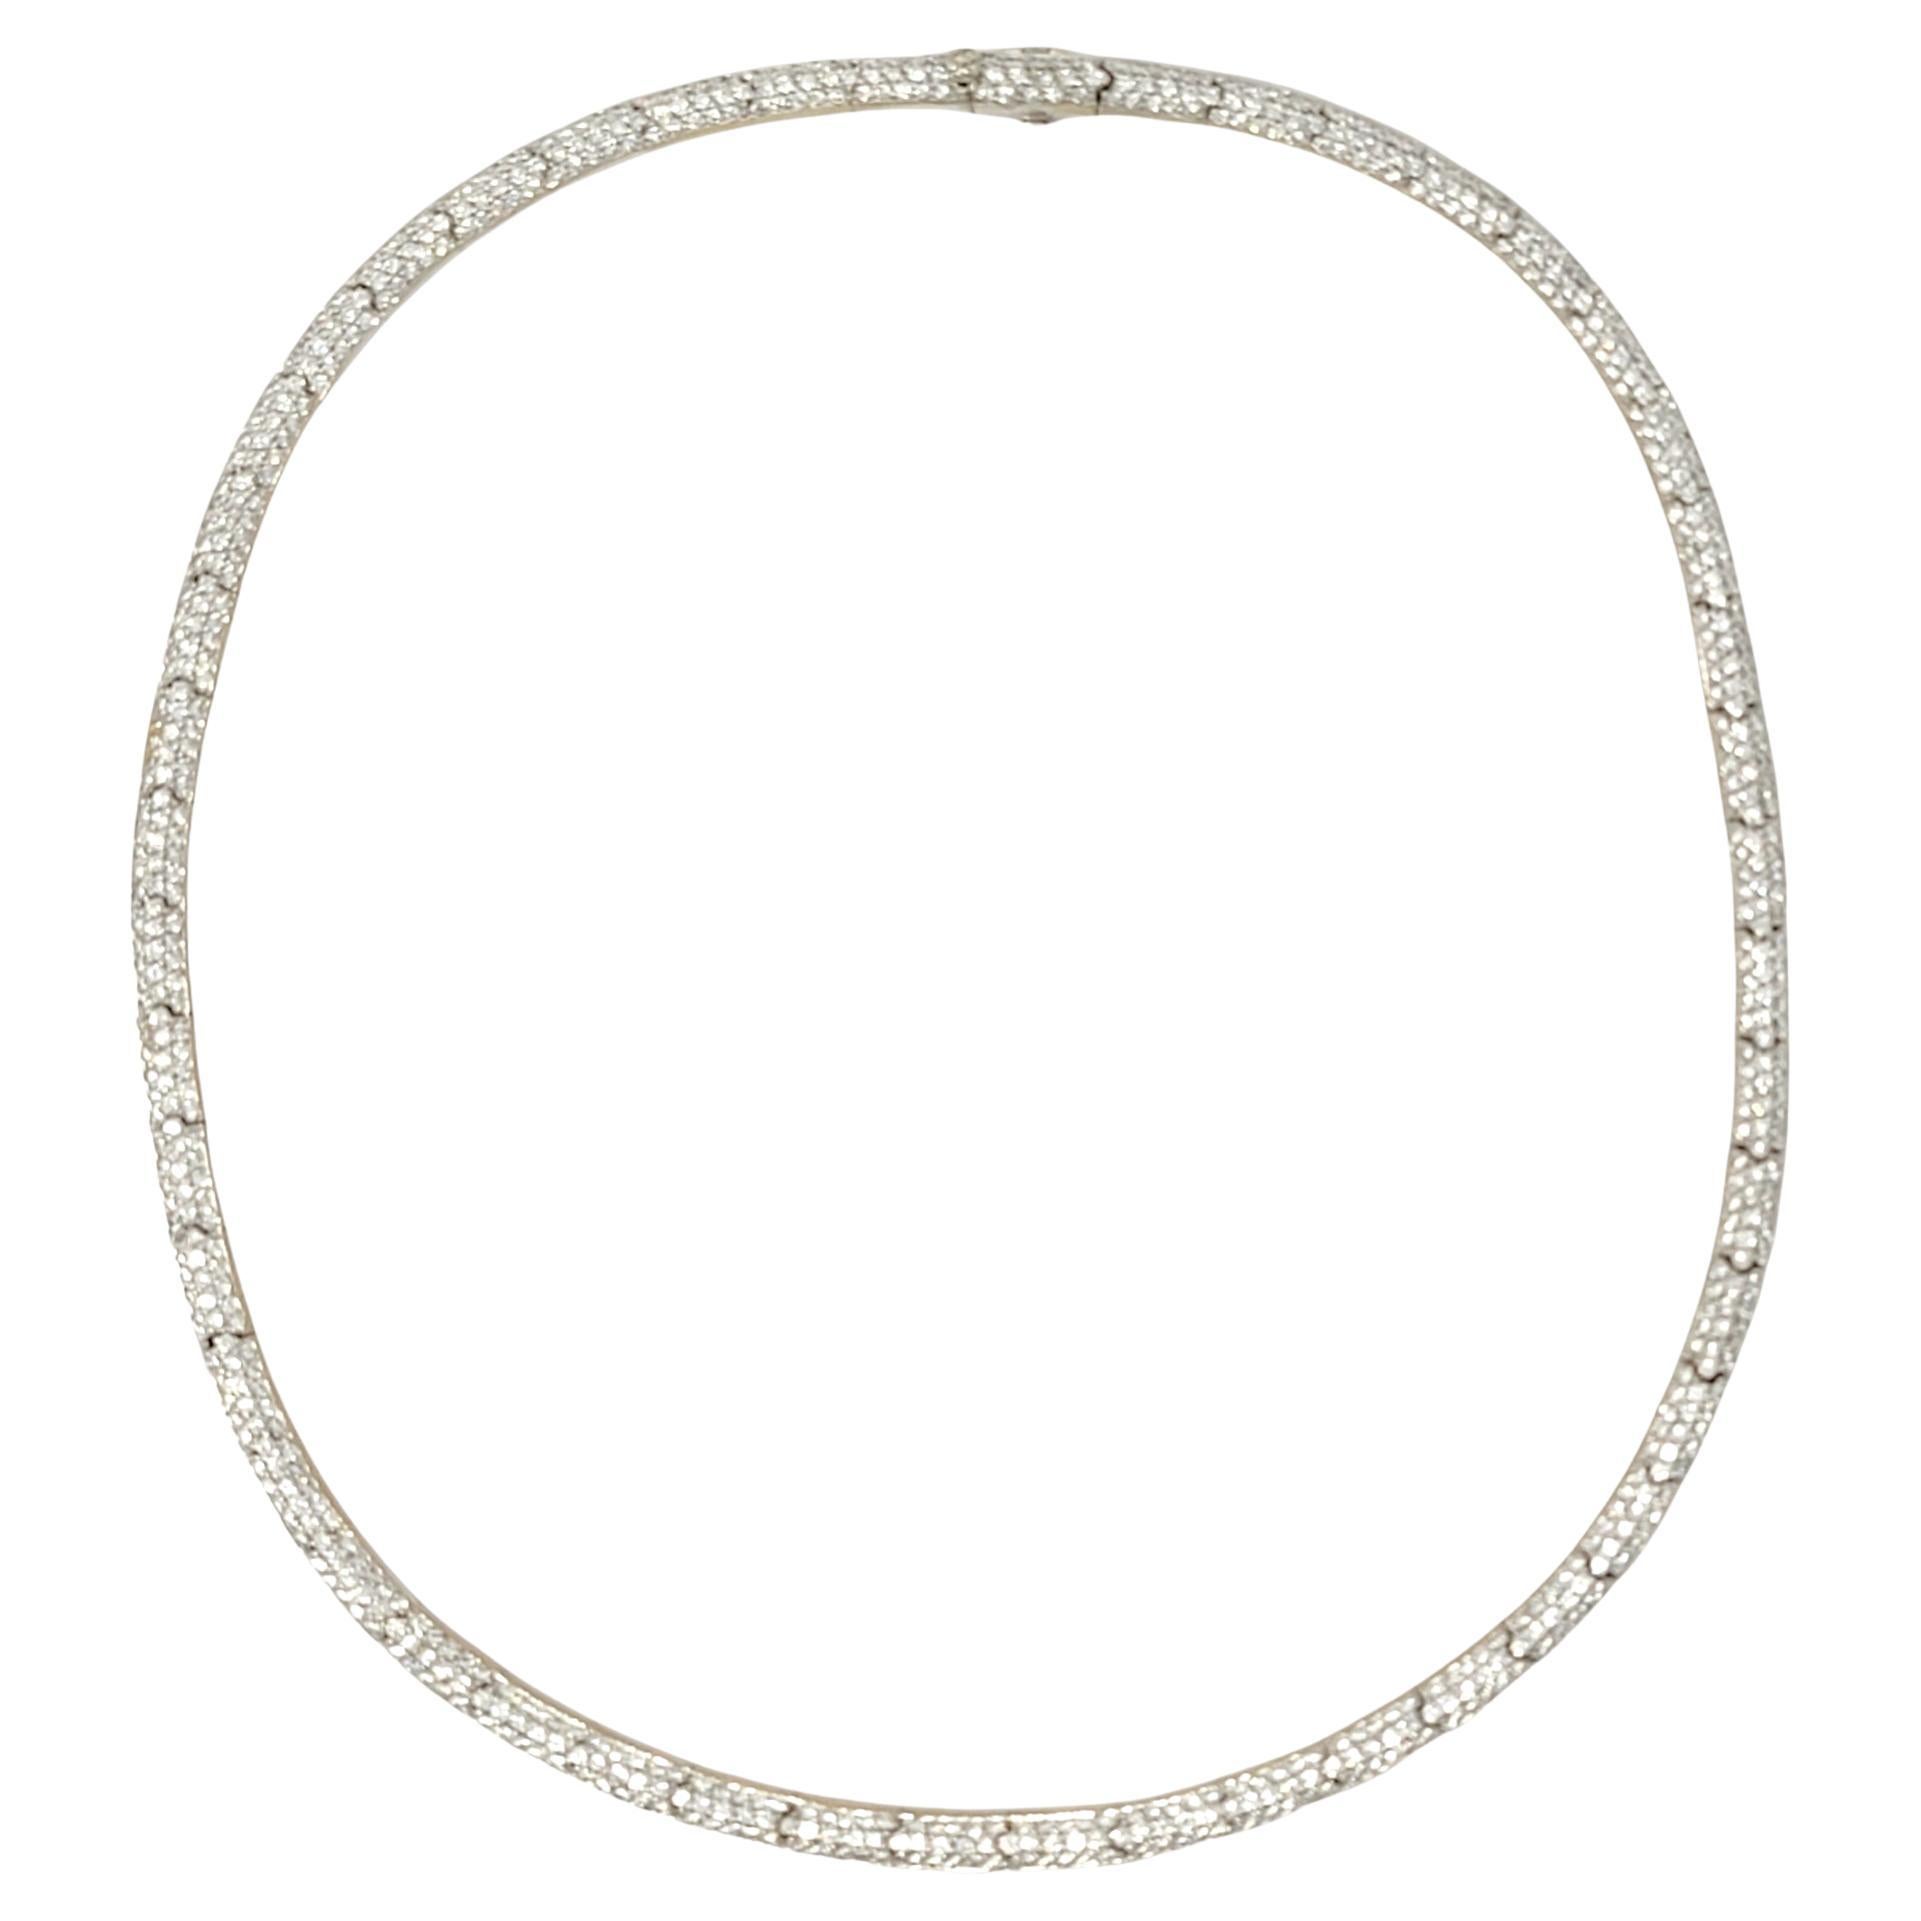 Strikingly beautiful minimalist choker style necklace. It is stunningly simple in design, with curved lines and glittering pave diamonds, making the piece absolutely glow! This lovely necklace features a series of solid 14 karat white gold bar links